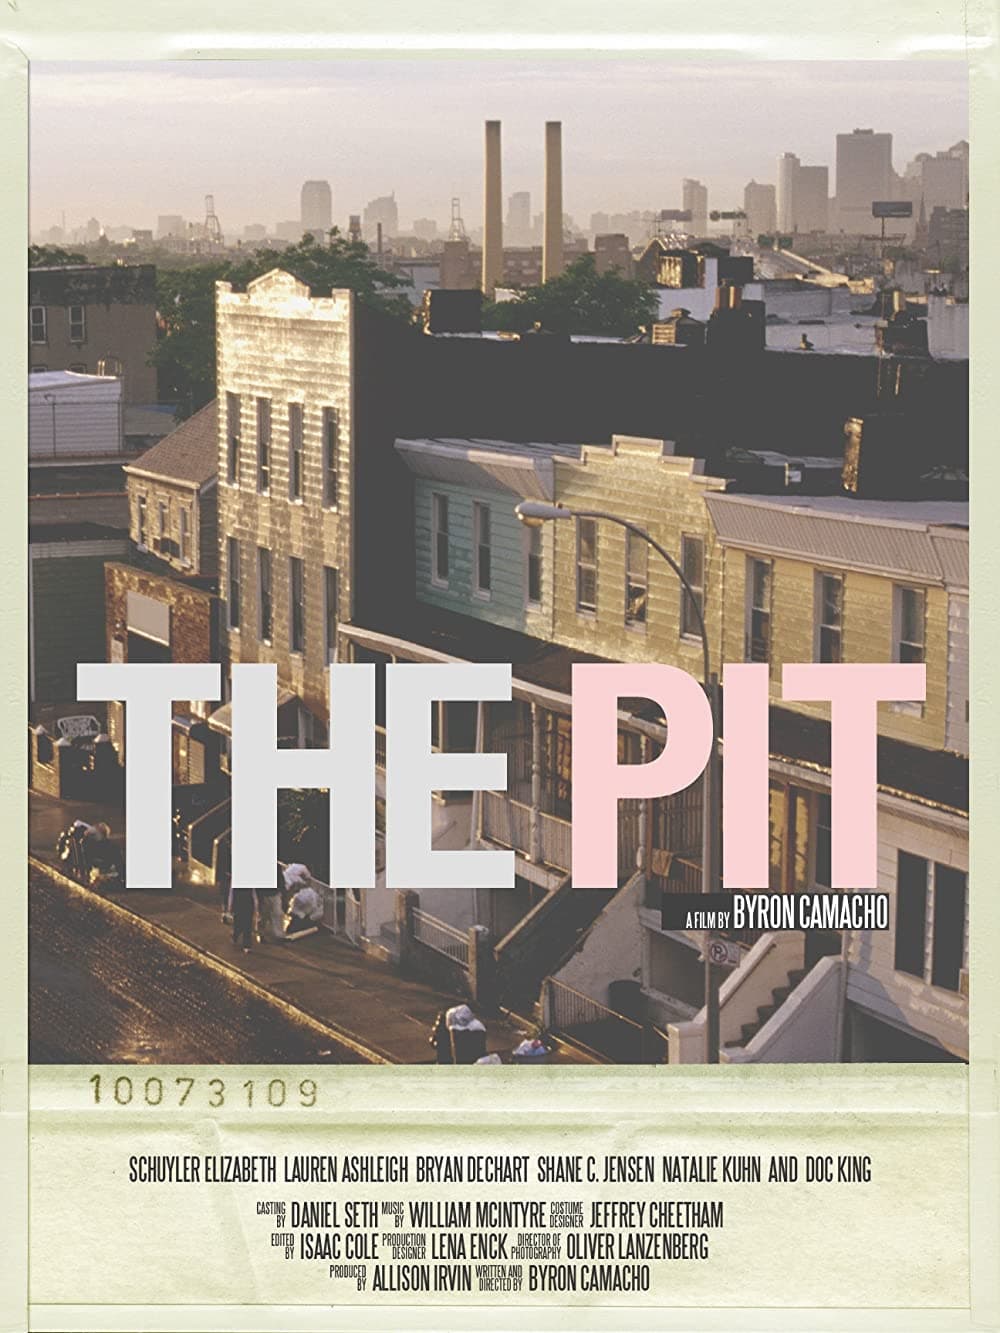 The Pit